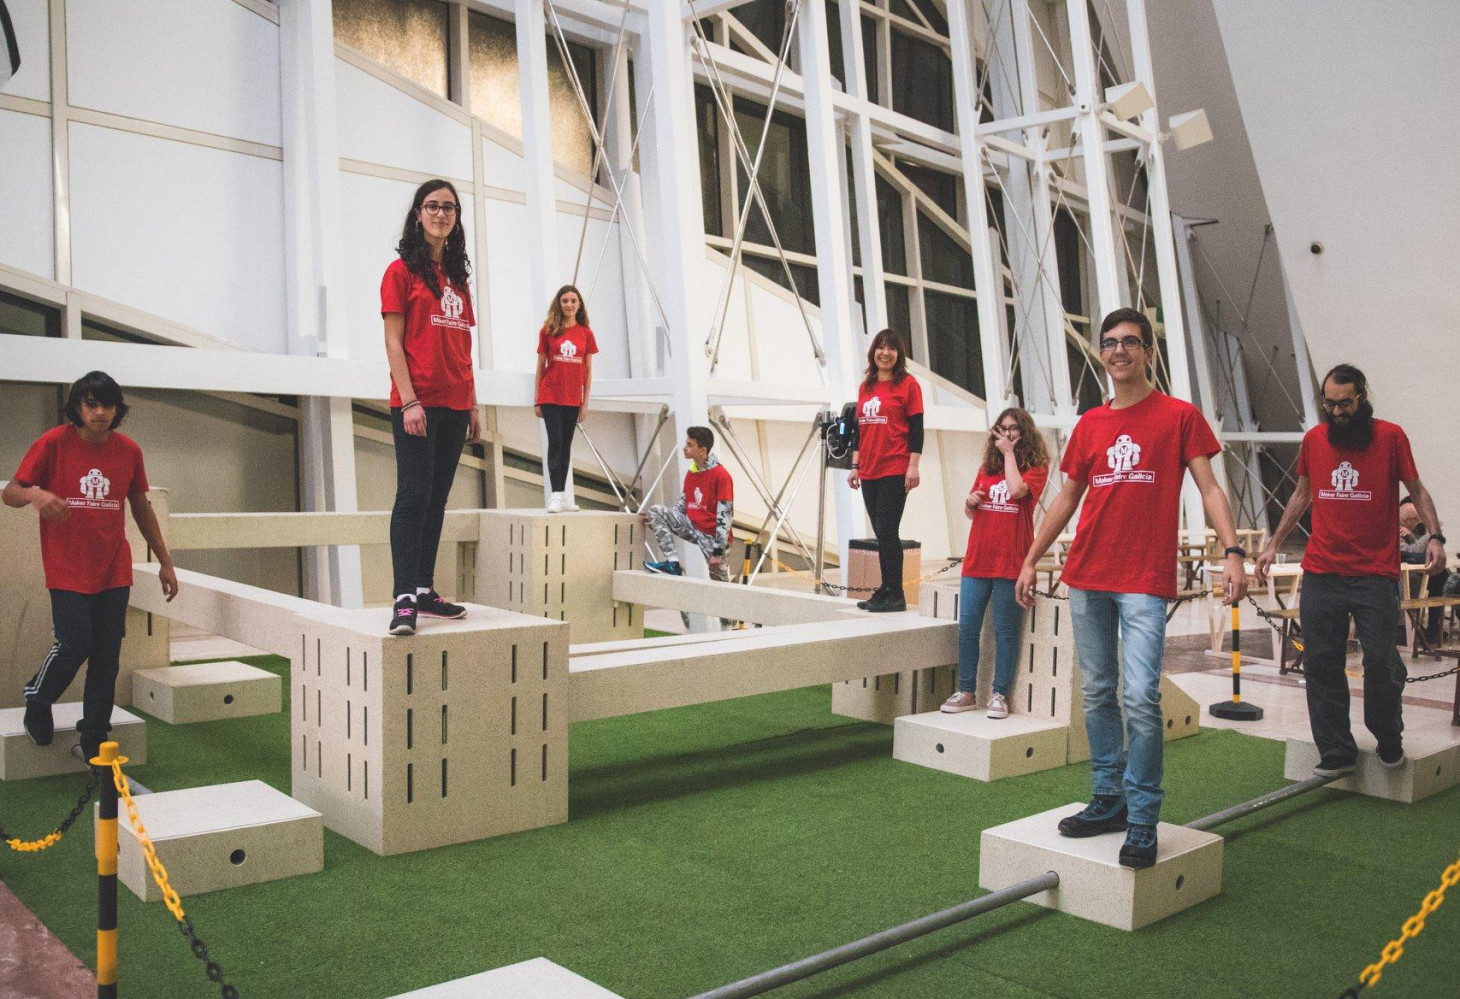 Call for volunteers of the Maker Faire Galicia